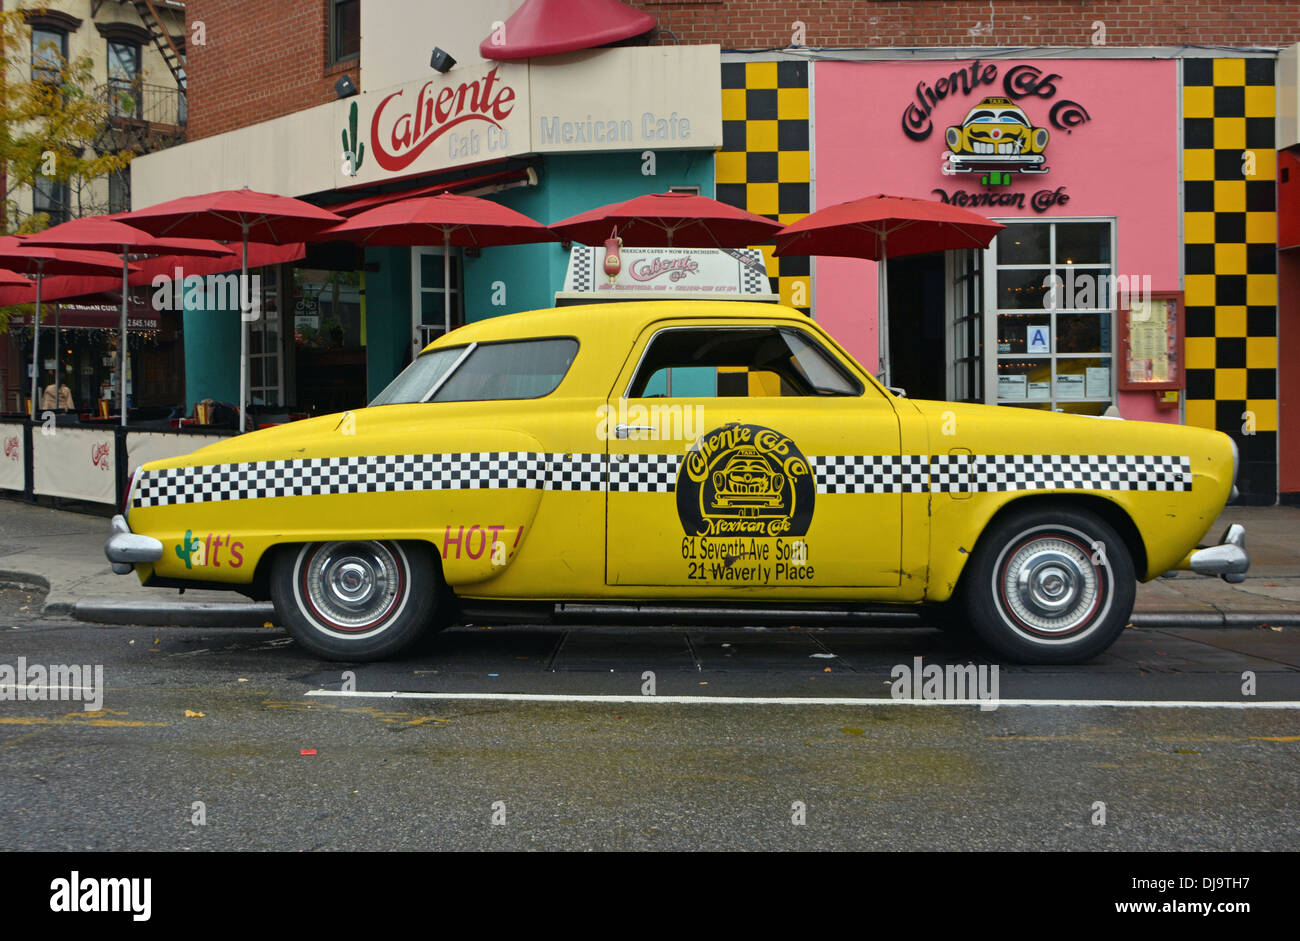 A 1950 Studebaker, the Taco Taxi,  parked outside the Calienete Cab Co. Mexican restaurant in Greenwich Village, New York City Stock Photo